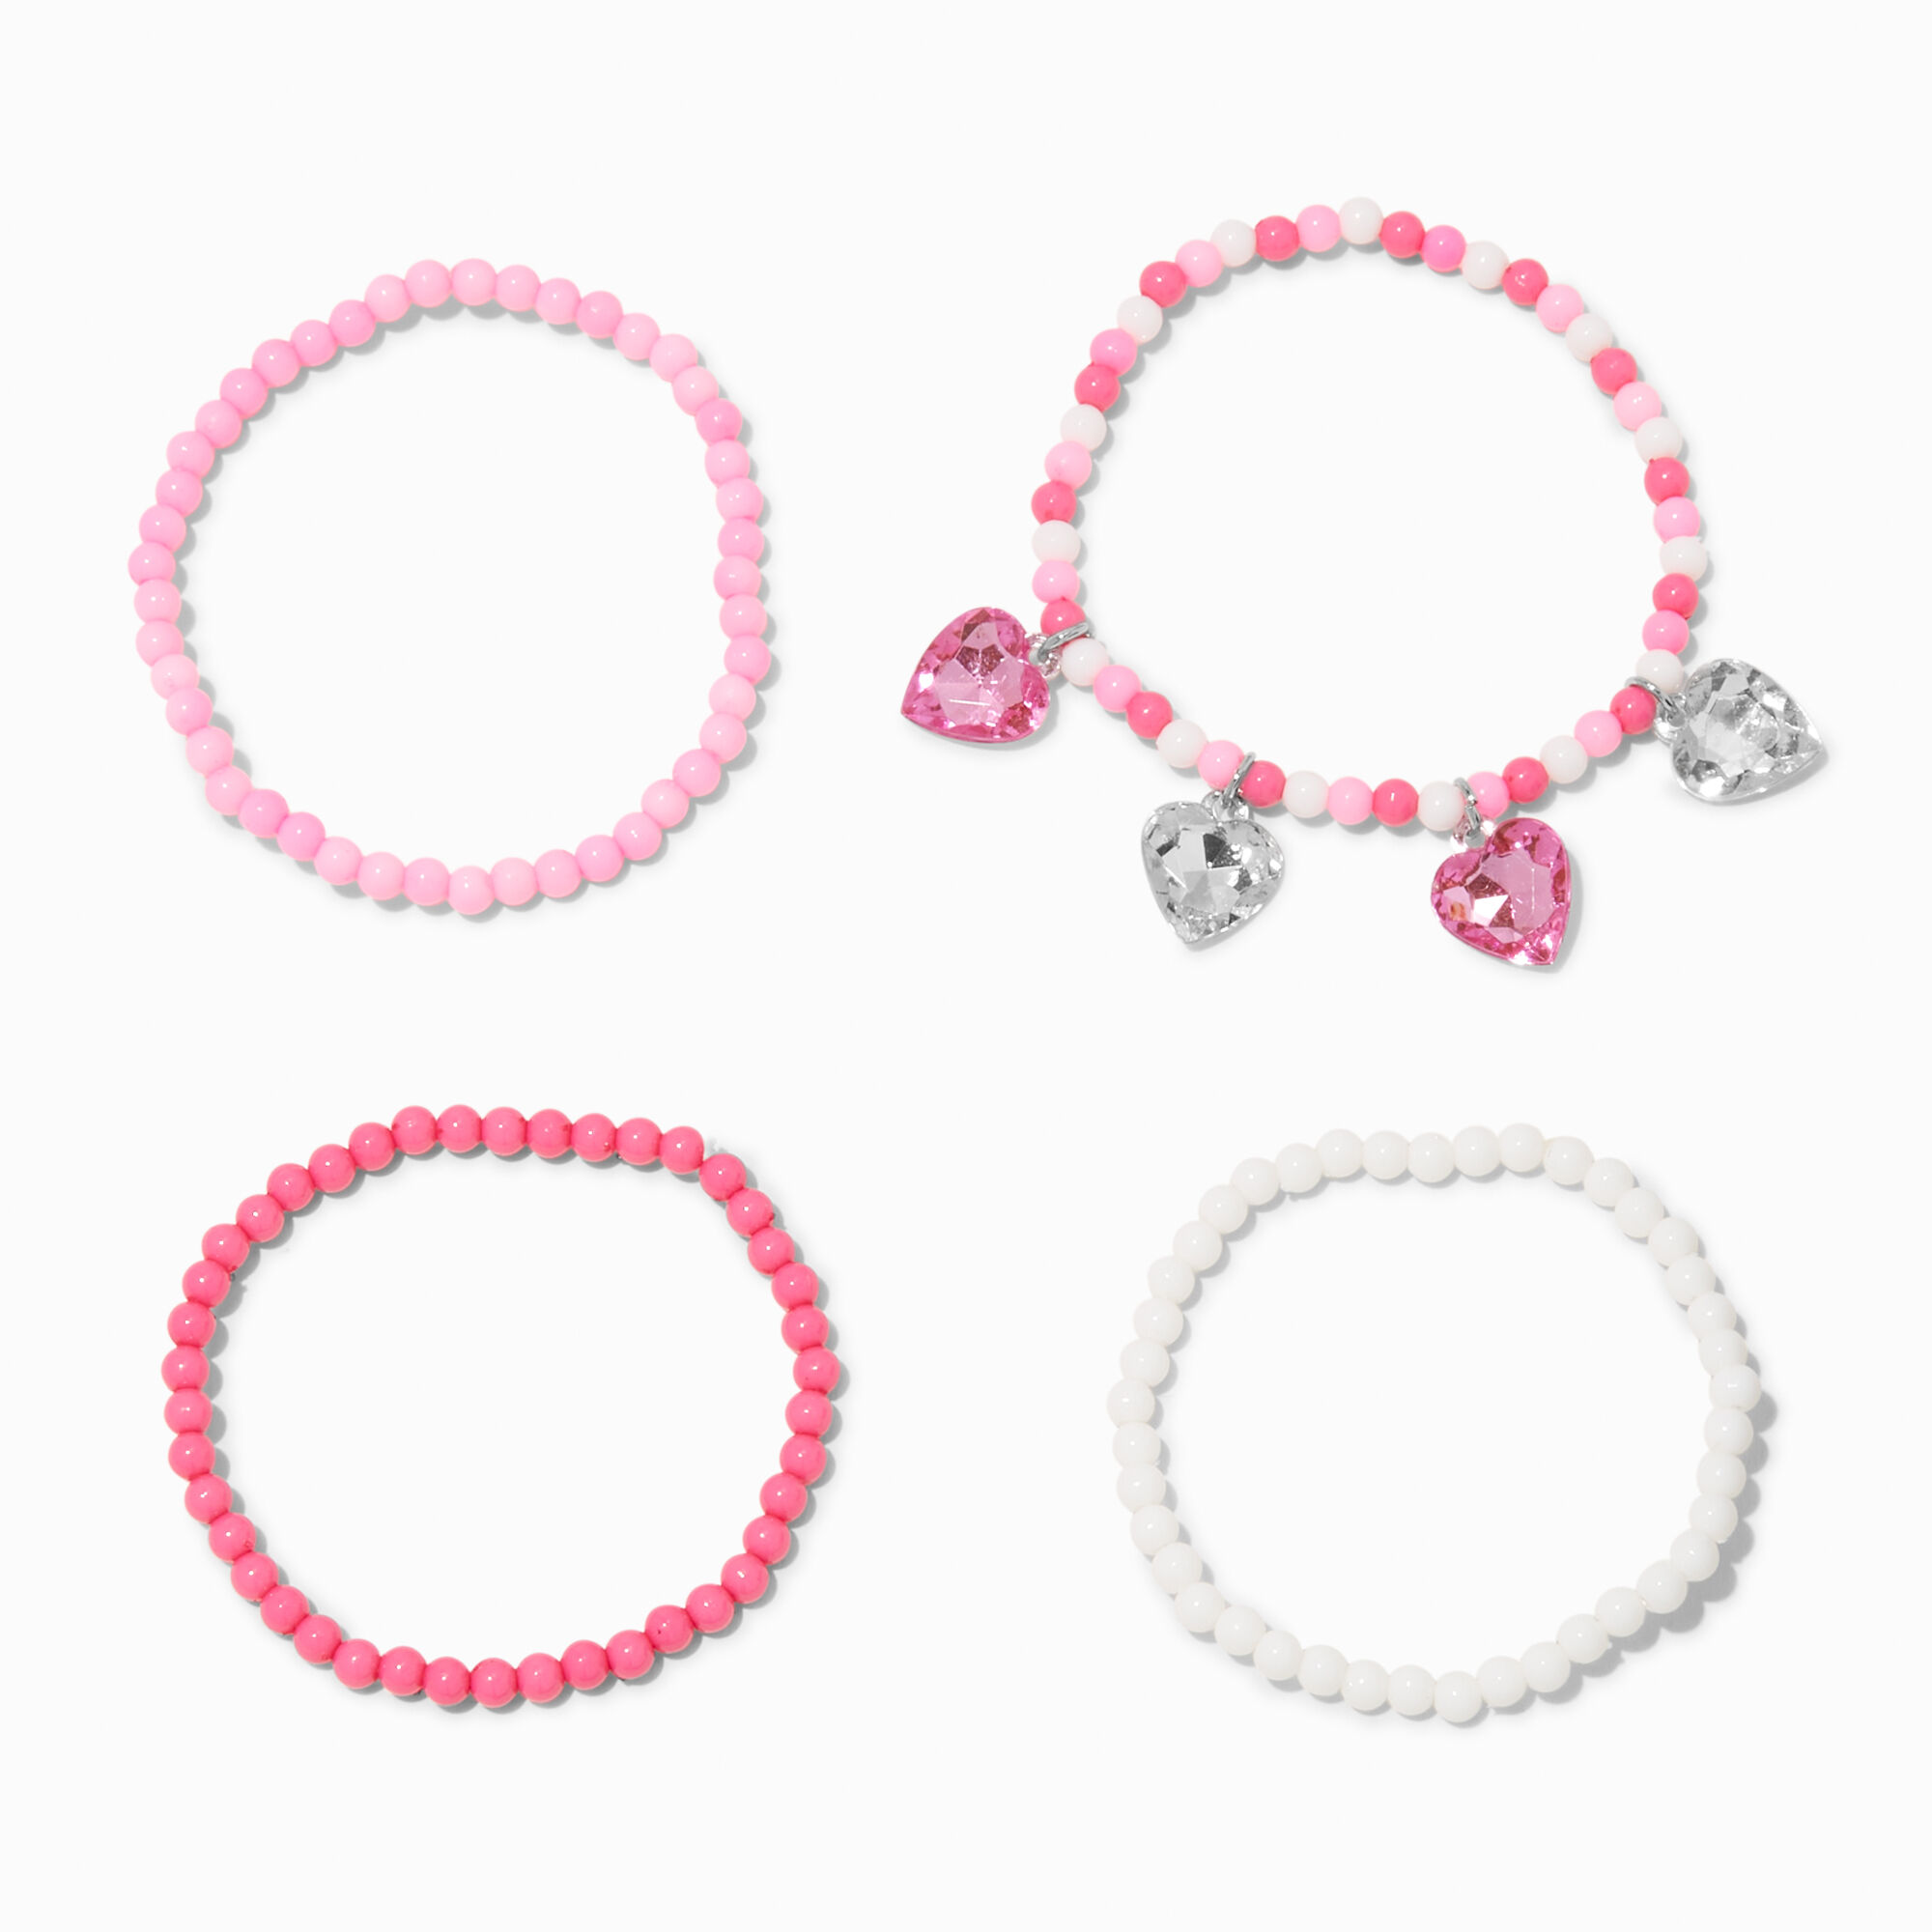 View Claires Club Heart Seed Bead Stretch Bracelets 4 Pack Pink information